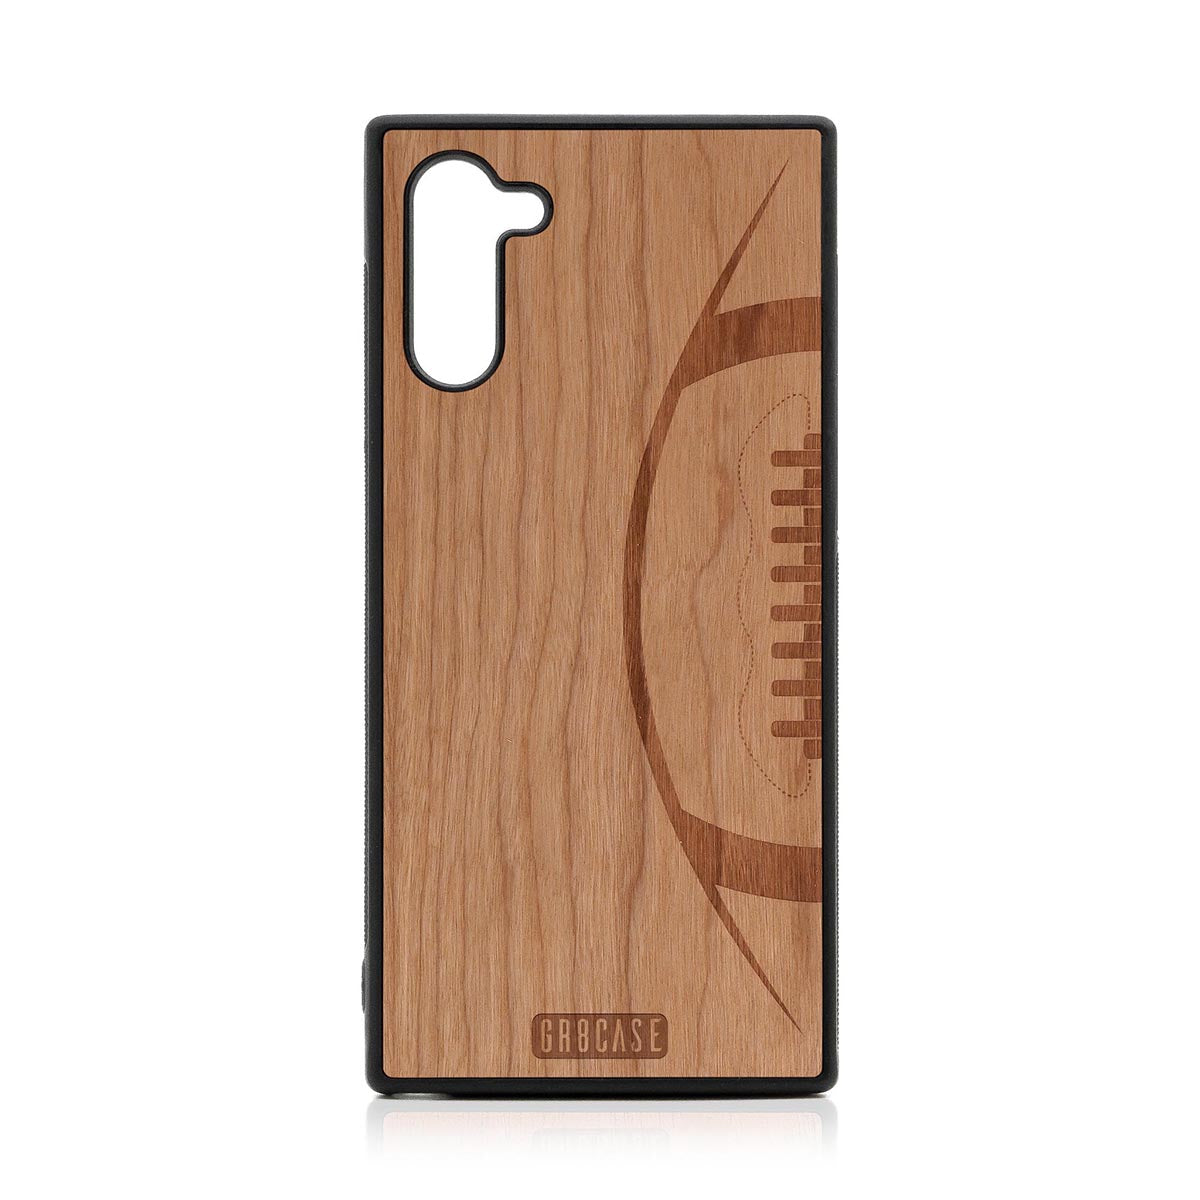 Football Design Wood Case For Samsung Galaxy Note 10 by GR8CASE